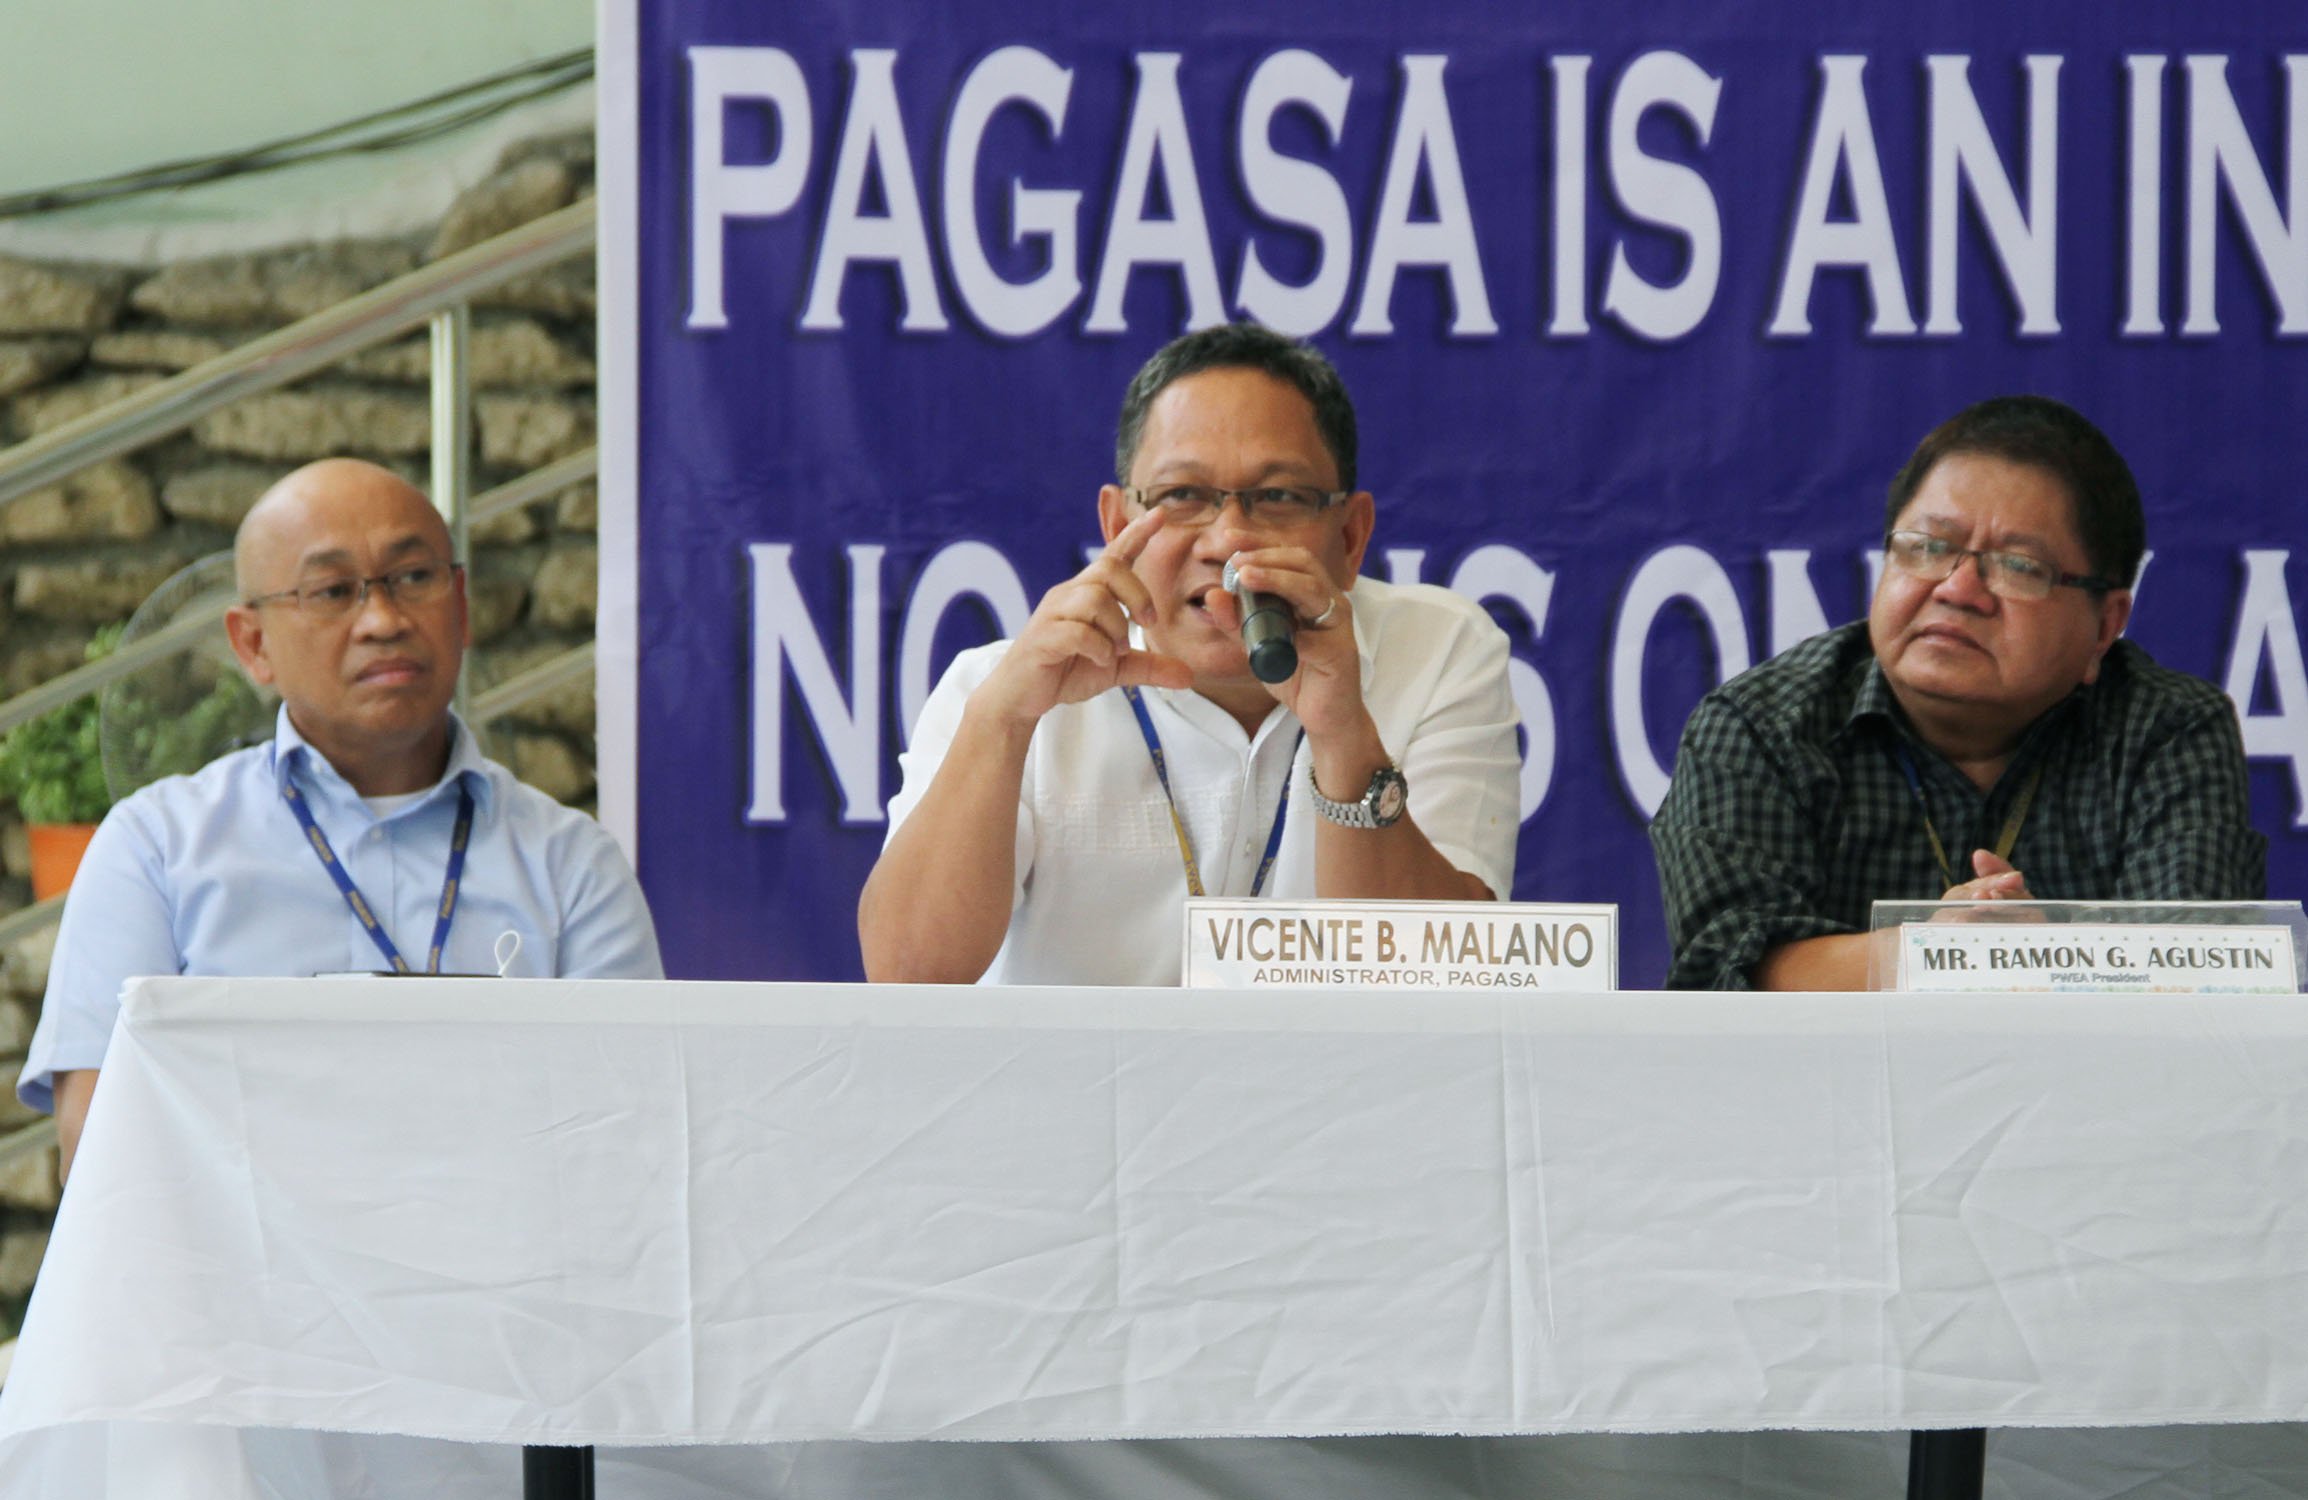 Opening statement of PAGASA Administrator Dr. Vicente B. Malano in a press conference